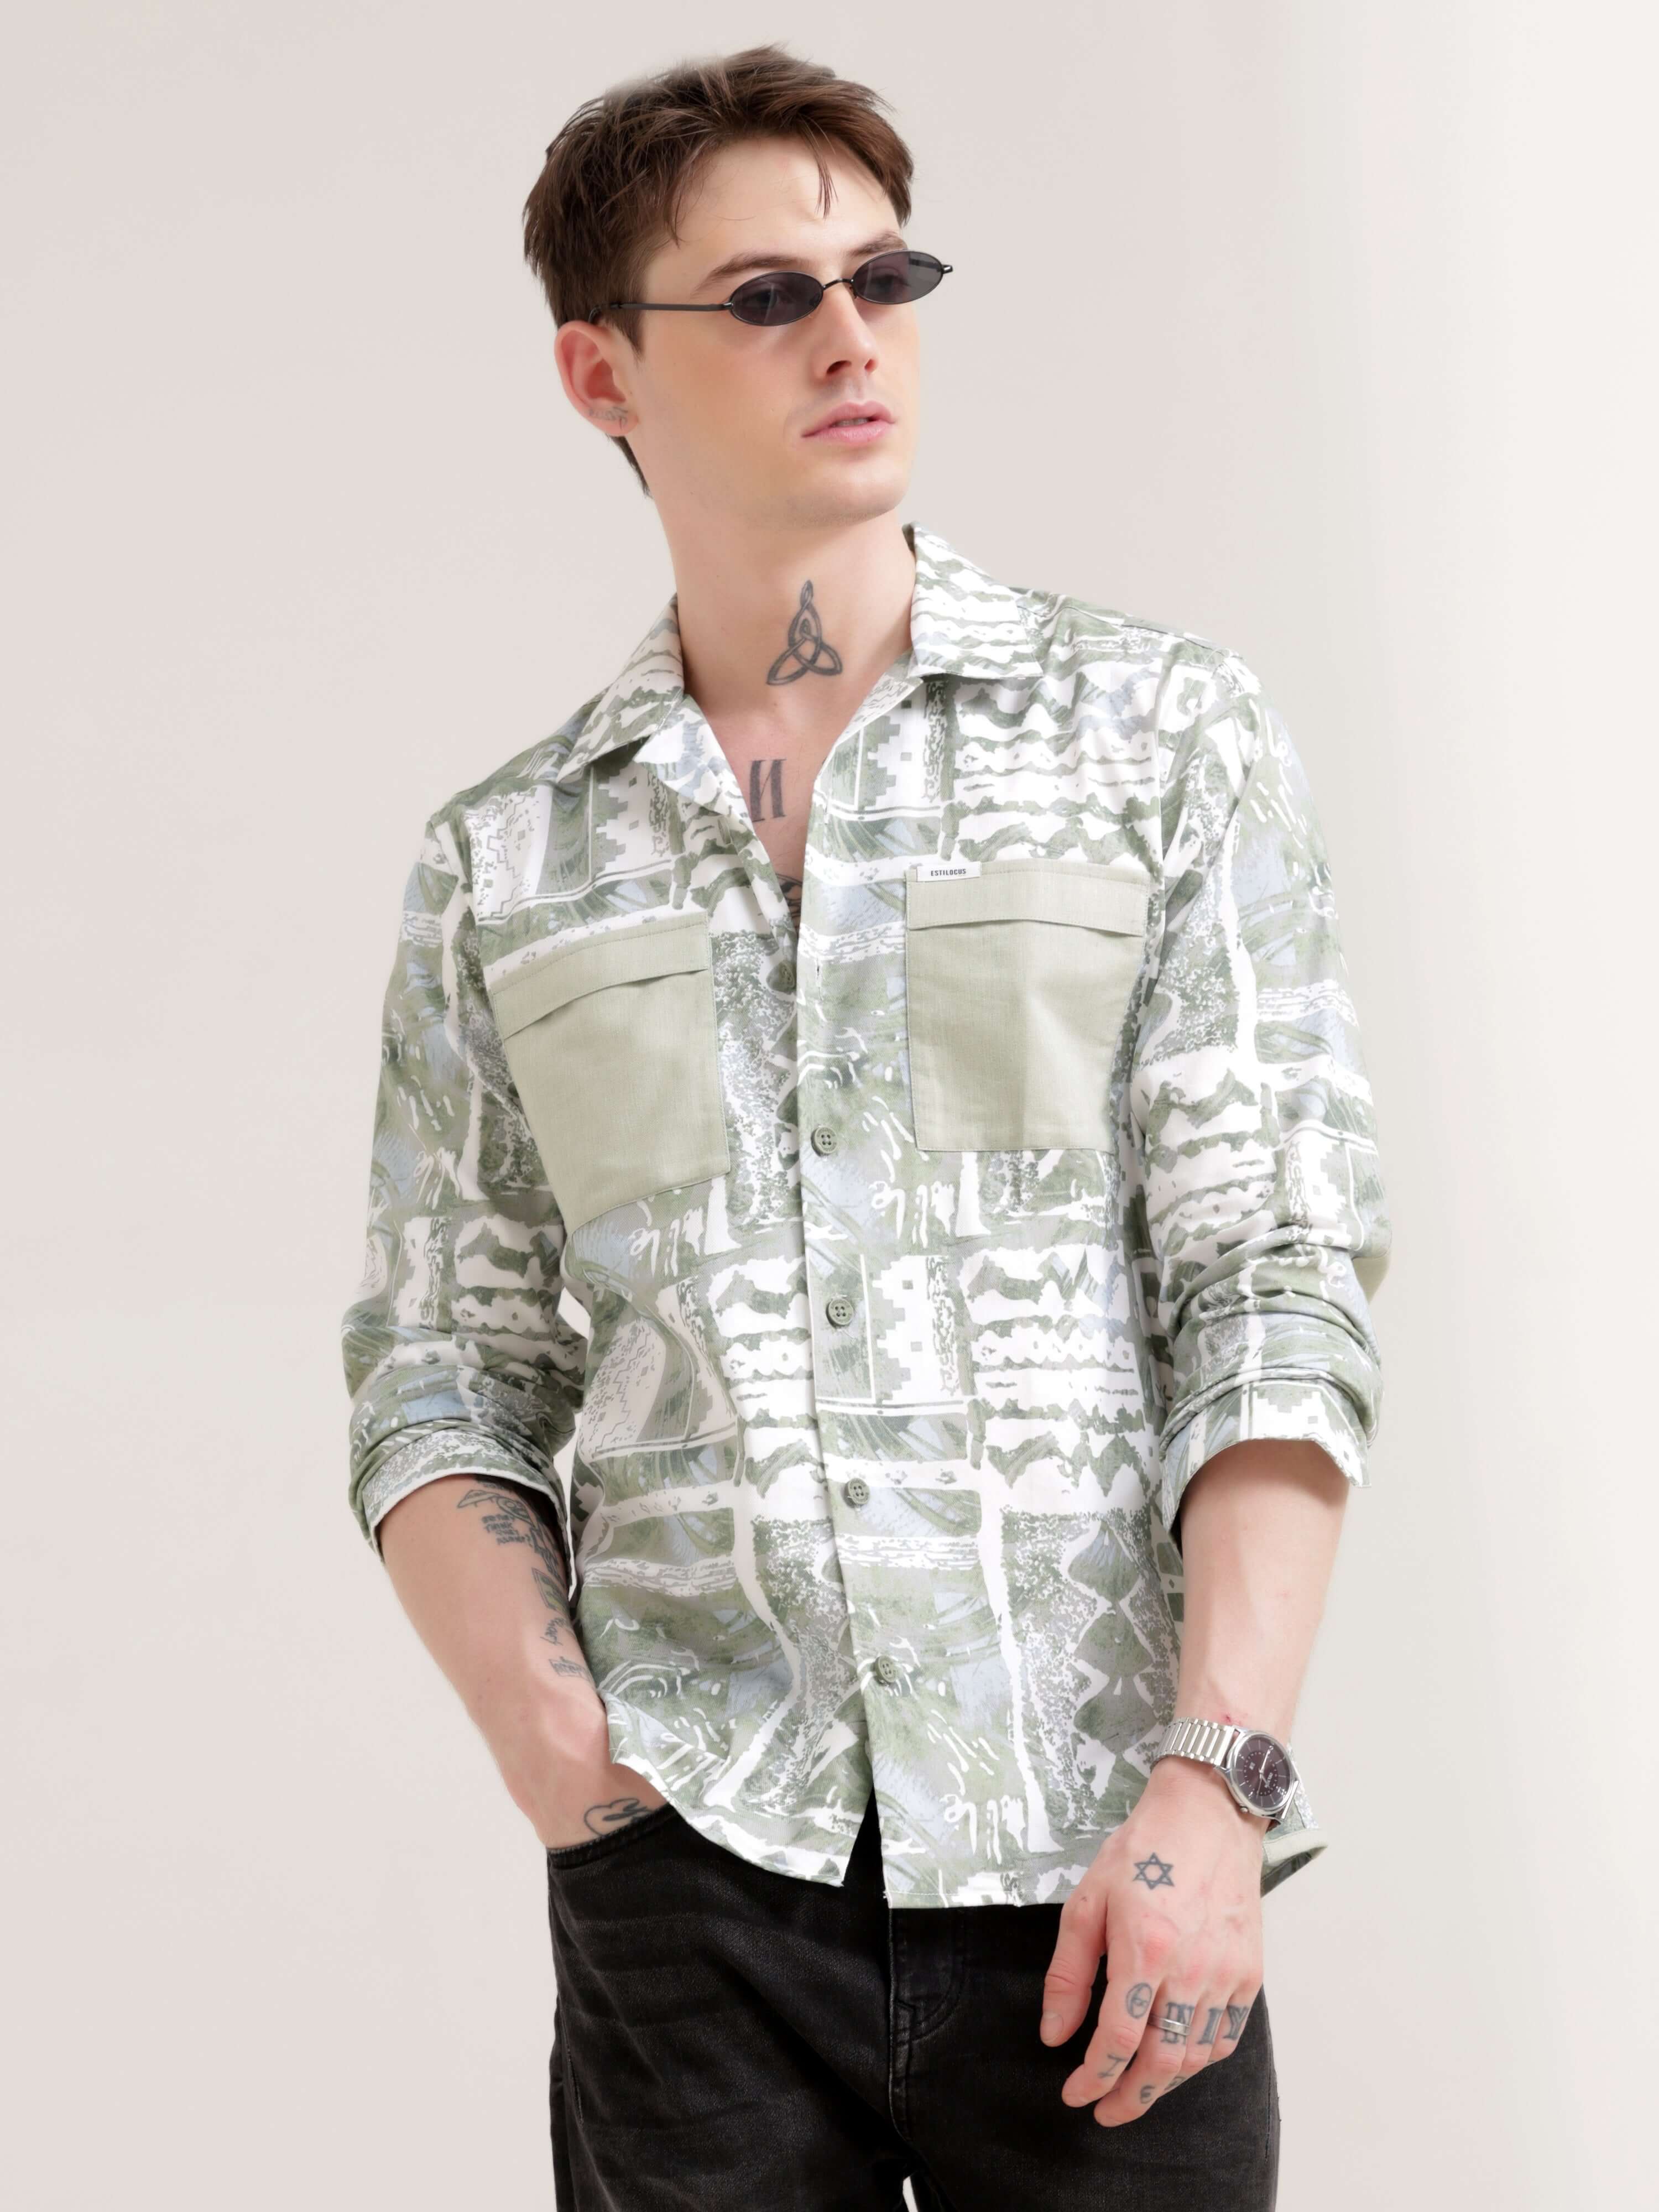 Duval green abstract print shirt - Men's Casual Wear shop online at Estilocus. Get seen in the Duval green abstract print shirt! Perfect blend of modern art & comfort. Unique design, standout style. Grab yours now!